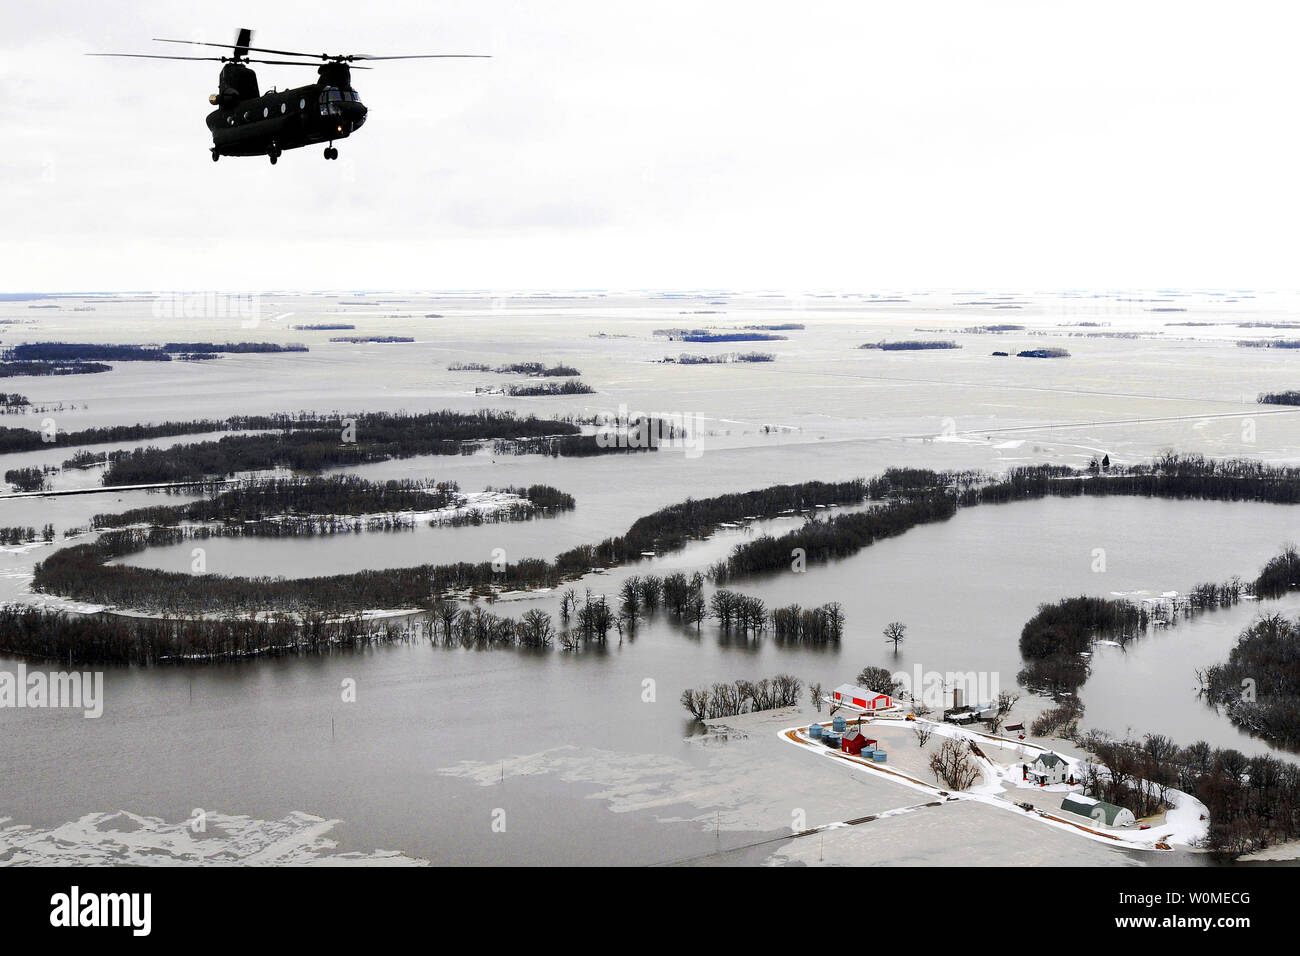 A Montana Army National Guard CH-47D Chinook helicopter flies over the North Dakota/Minnesota border area flooded by the Red River, April 1, 2009.  (UPI Photo/Roger M. Dey/US Army) Stock Photo